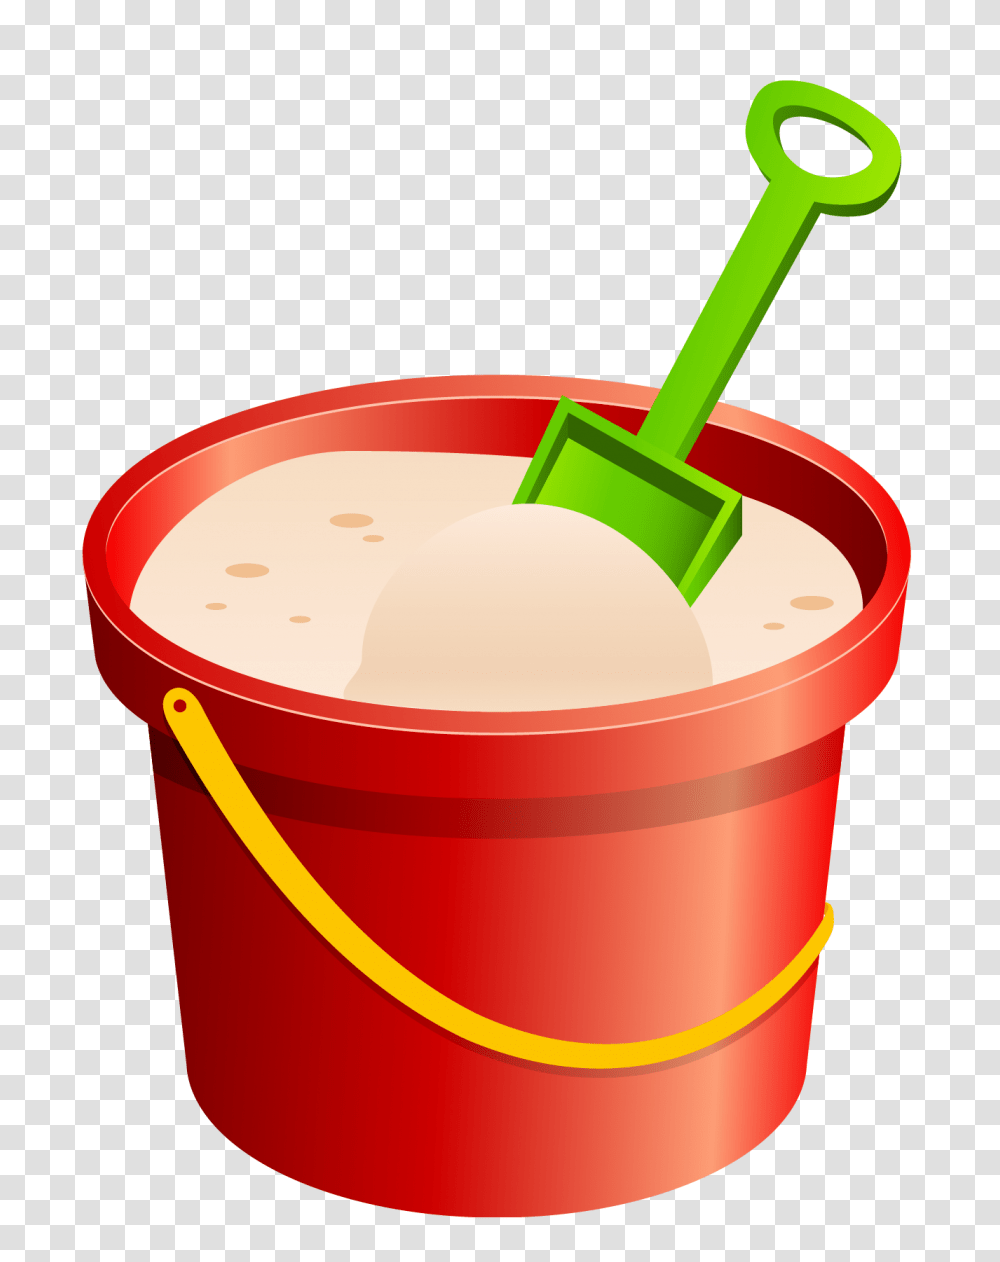 Rock And Roll Sand Bucket Clip Art Red Sand Bucket And Green, Bowl Transparent Png